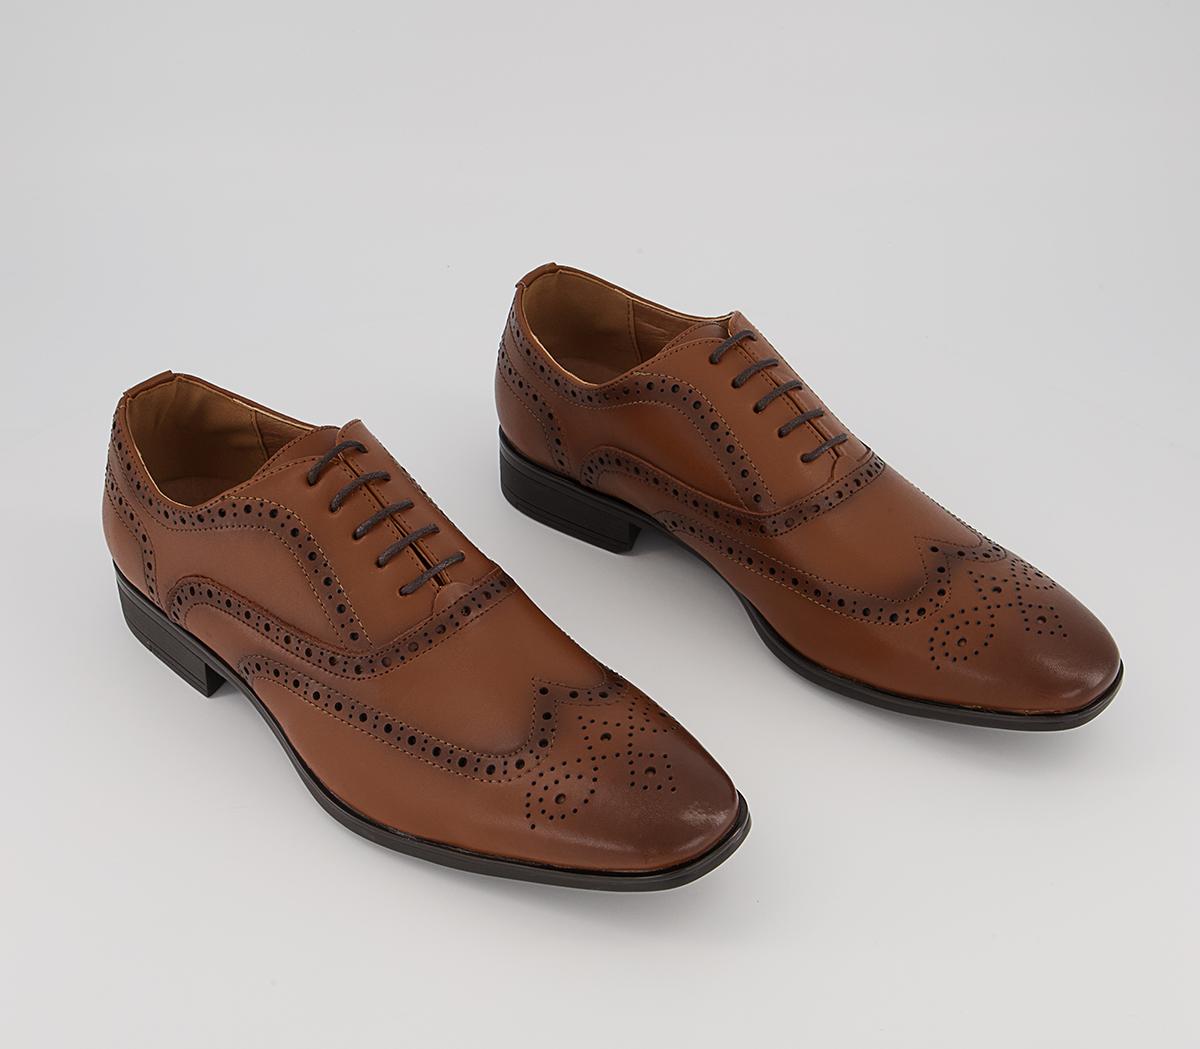 OFFICE Macro 2 Oxford Brogues Tan Leather - Men’s Smart Shoes